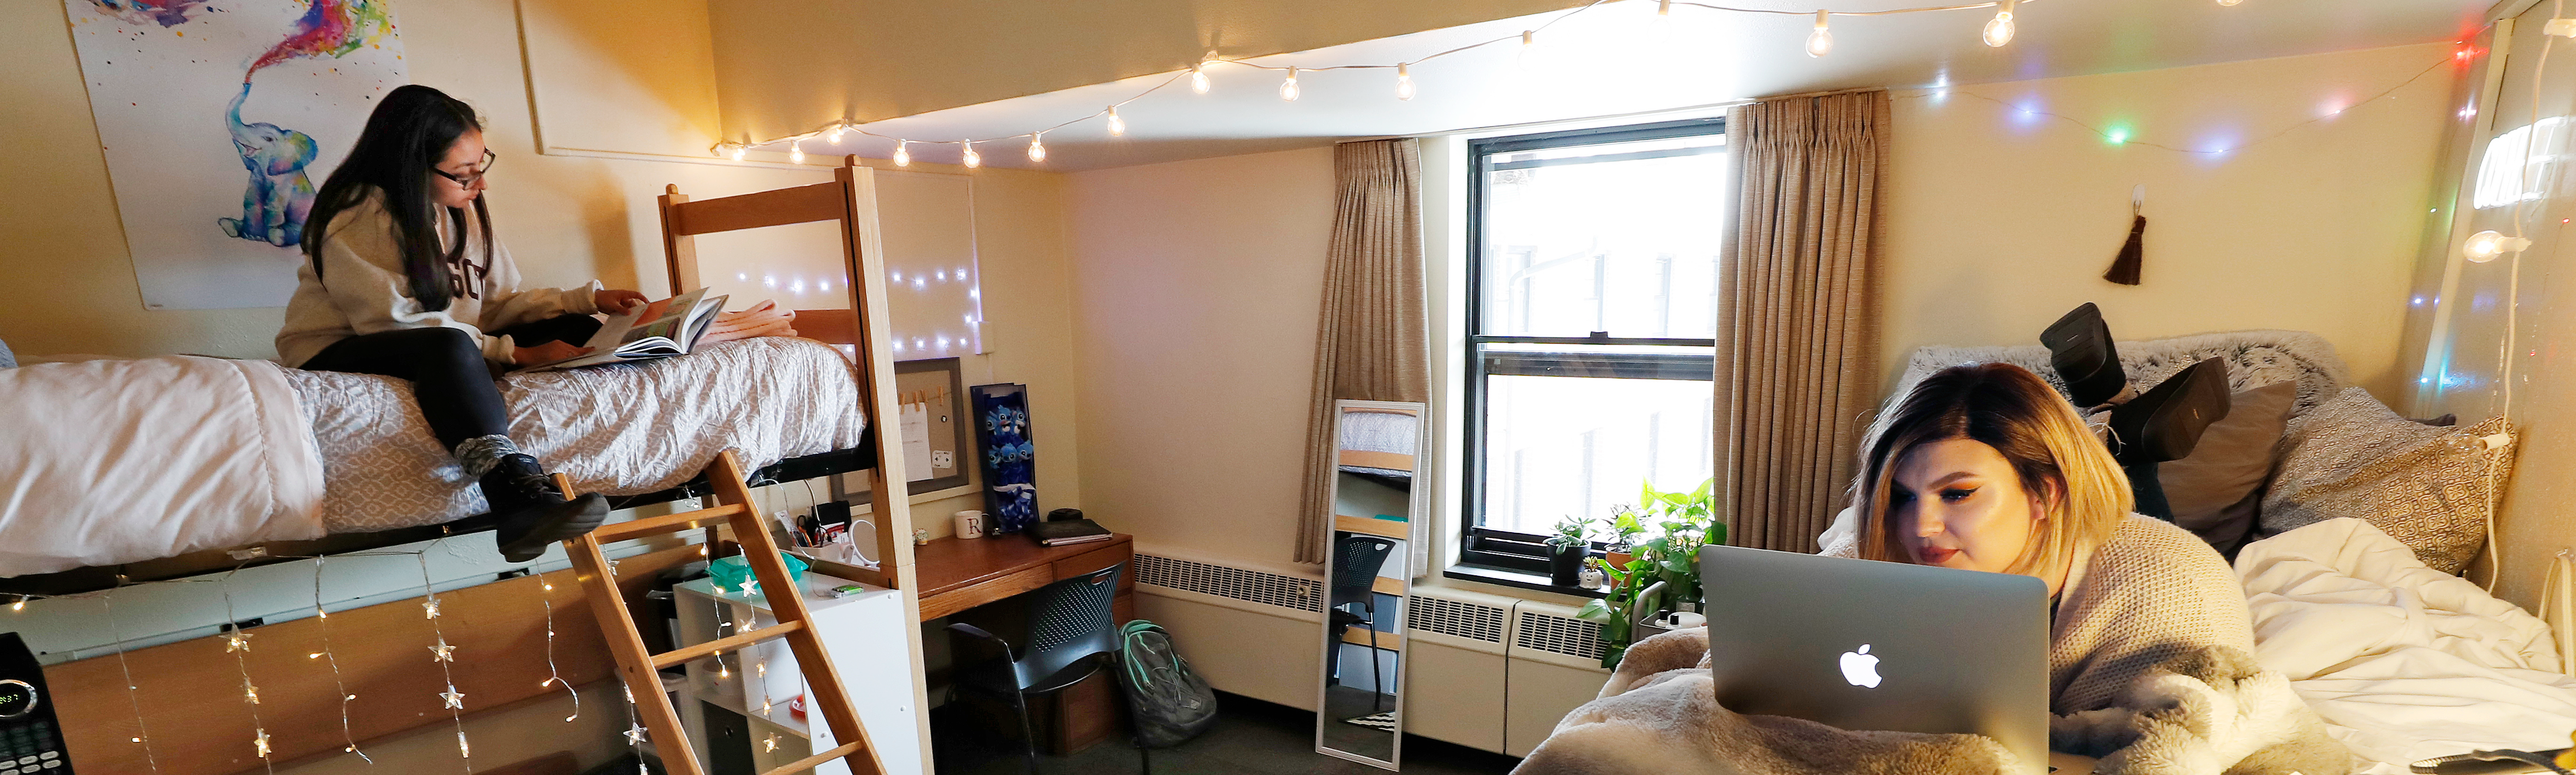 Two students studying in their residence hall room